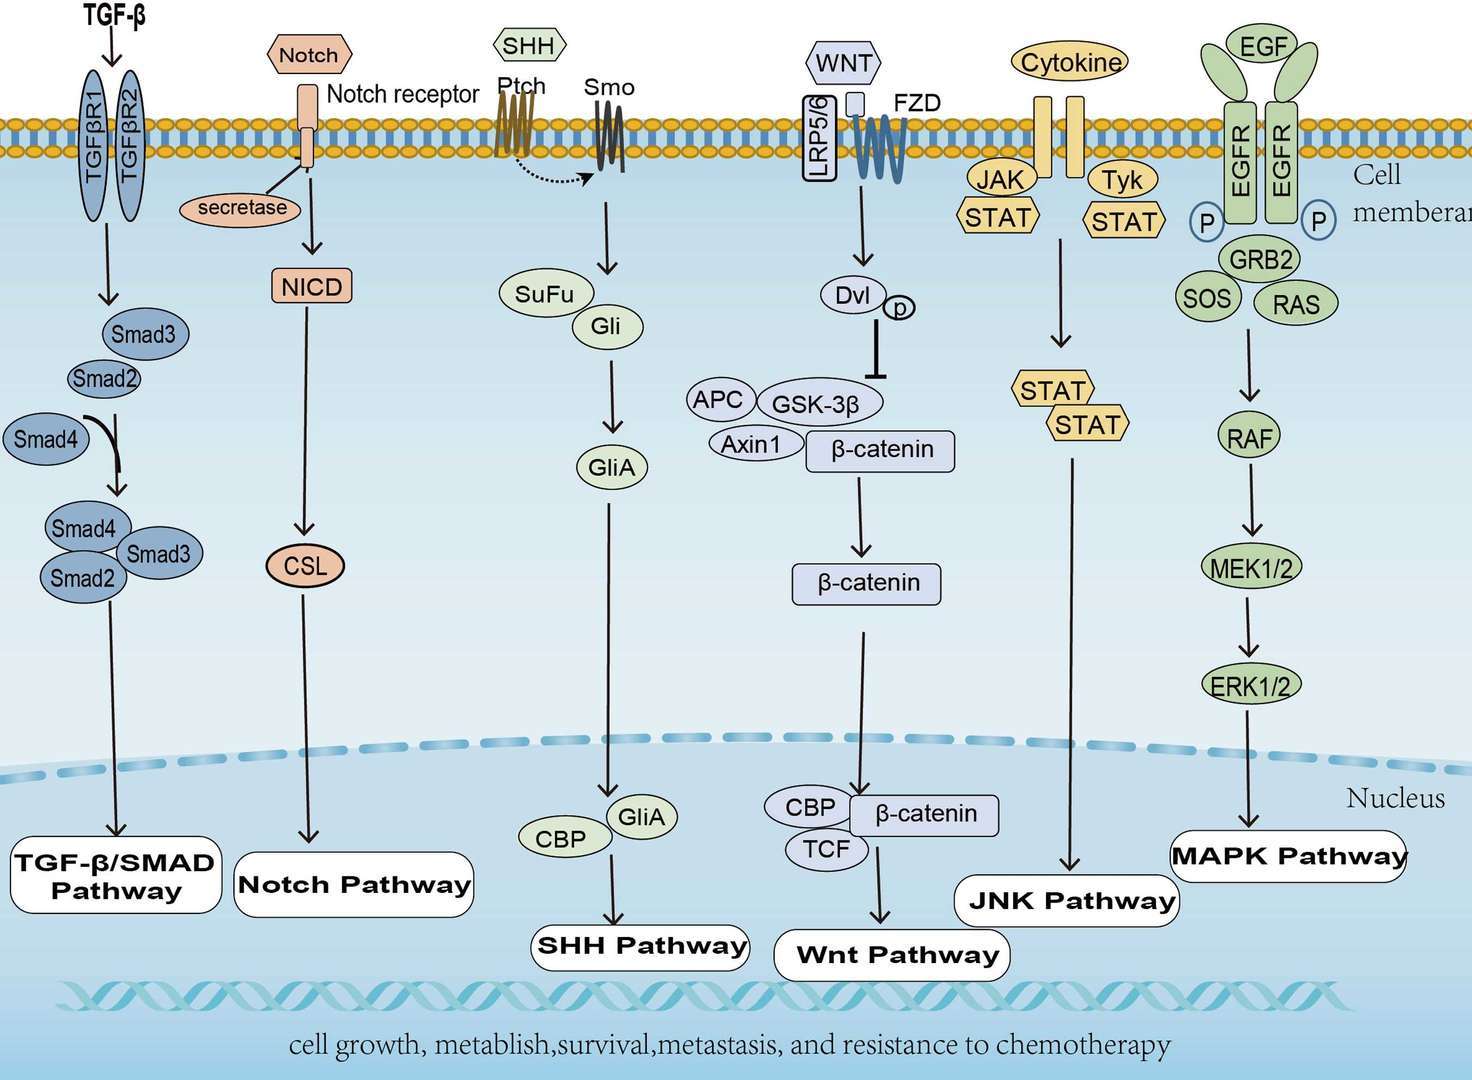 Pancreatic Cancer Overview - Pathways, Diagnosis, Targeted Therapies